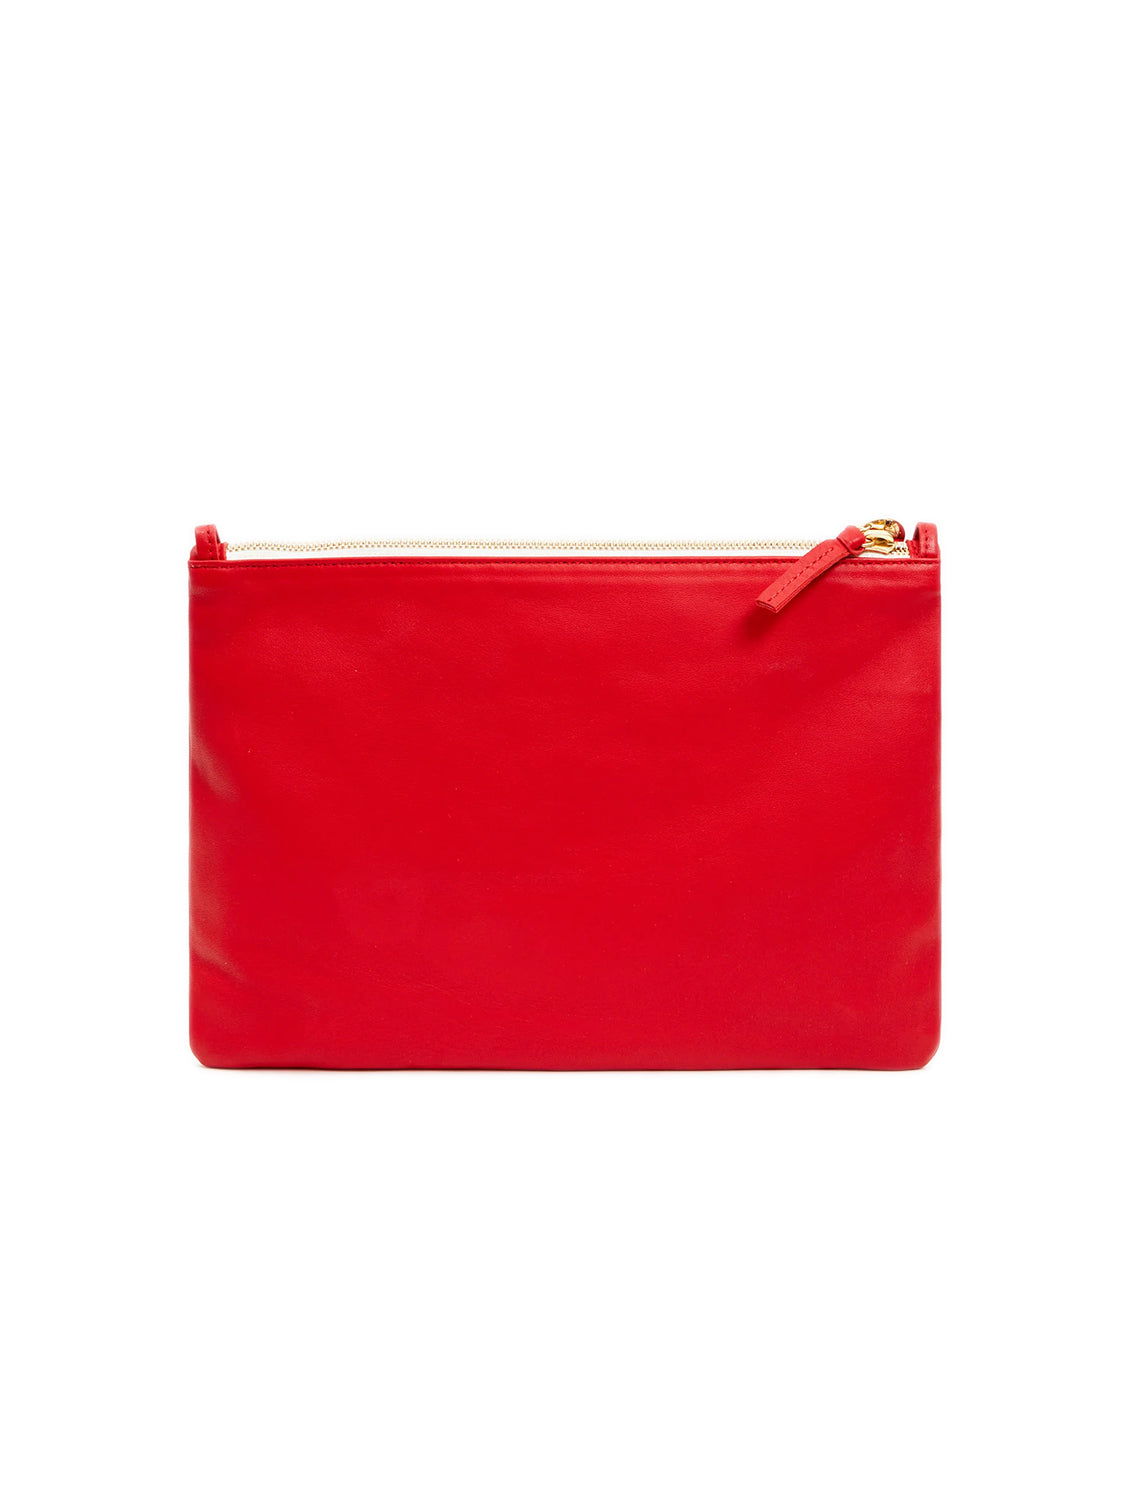 Clare V. Flat Clutch with Tabs Cherry Red Oui